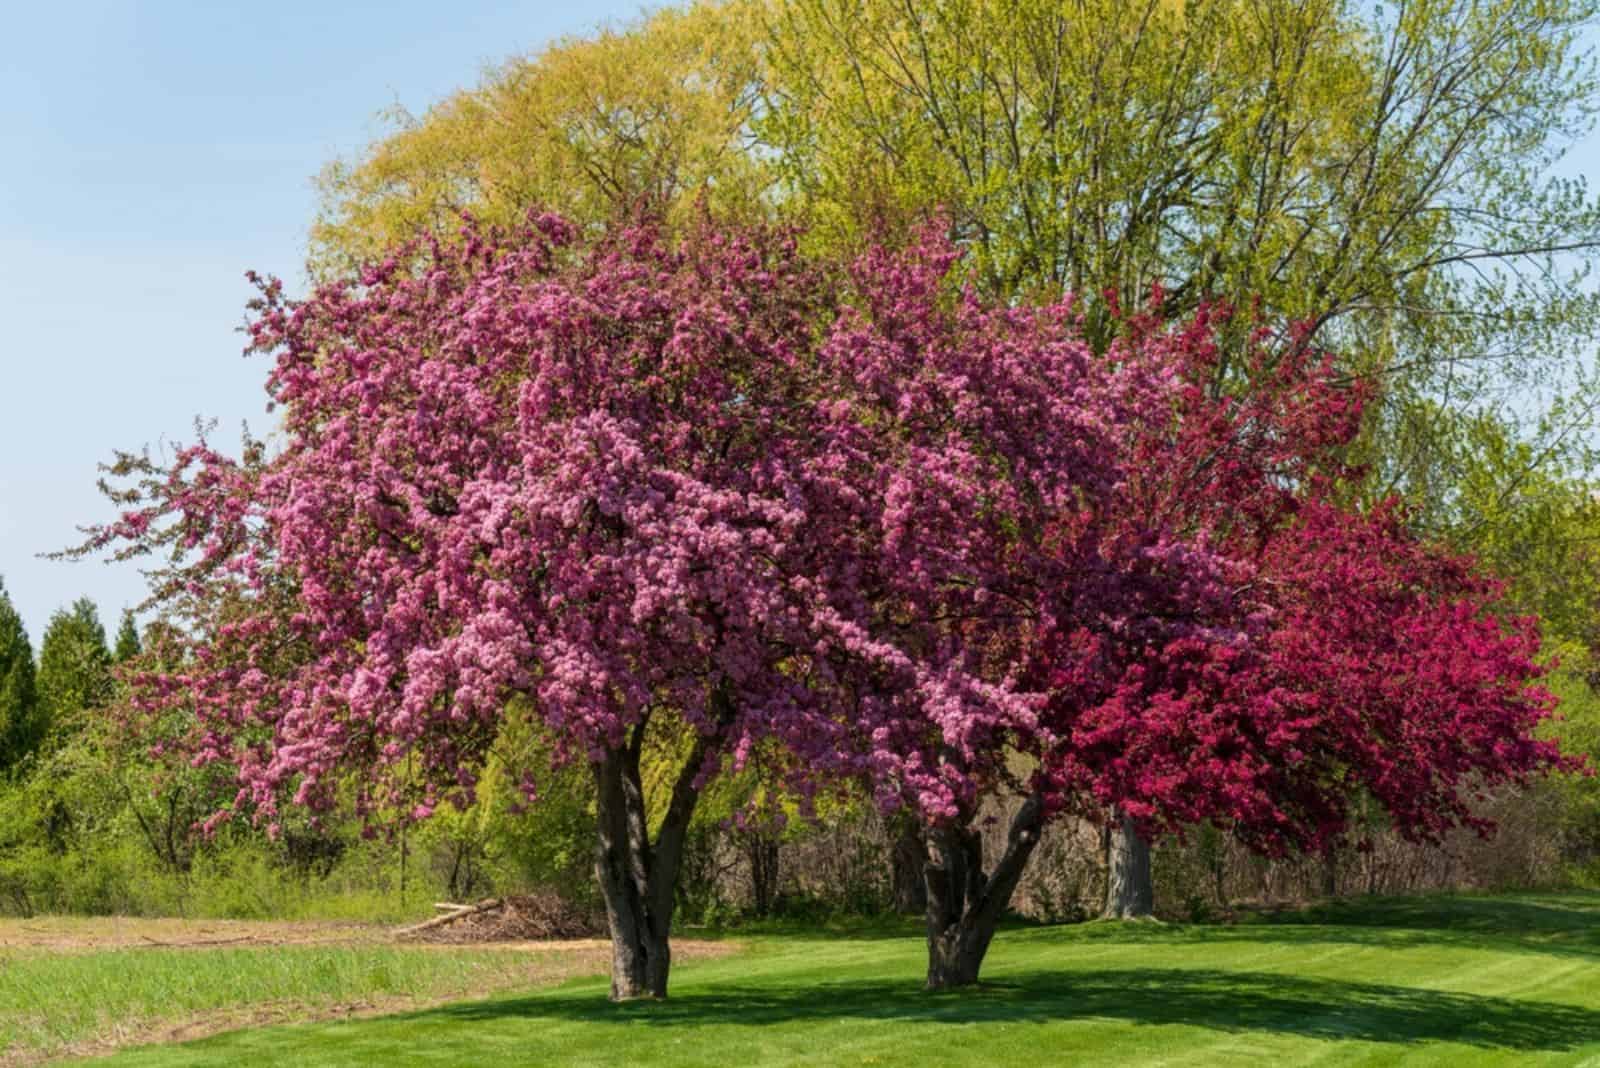 Crabapple trees with red blossoms in spring